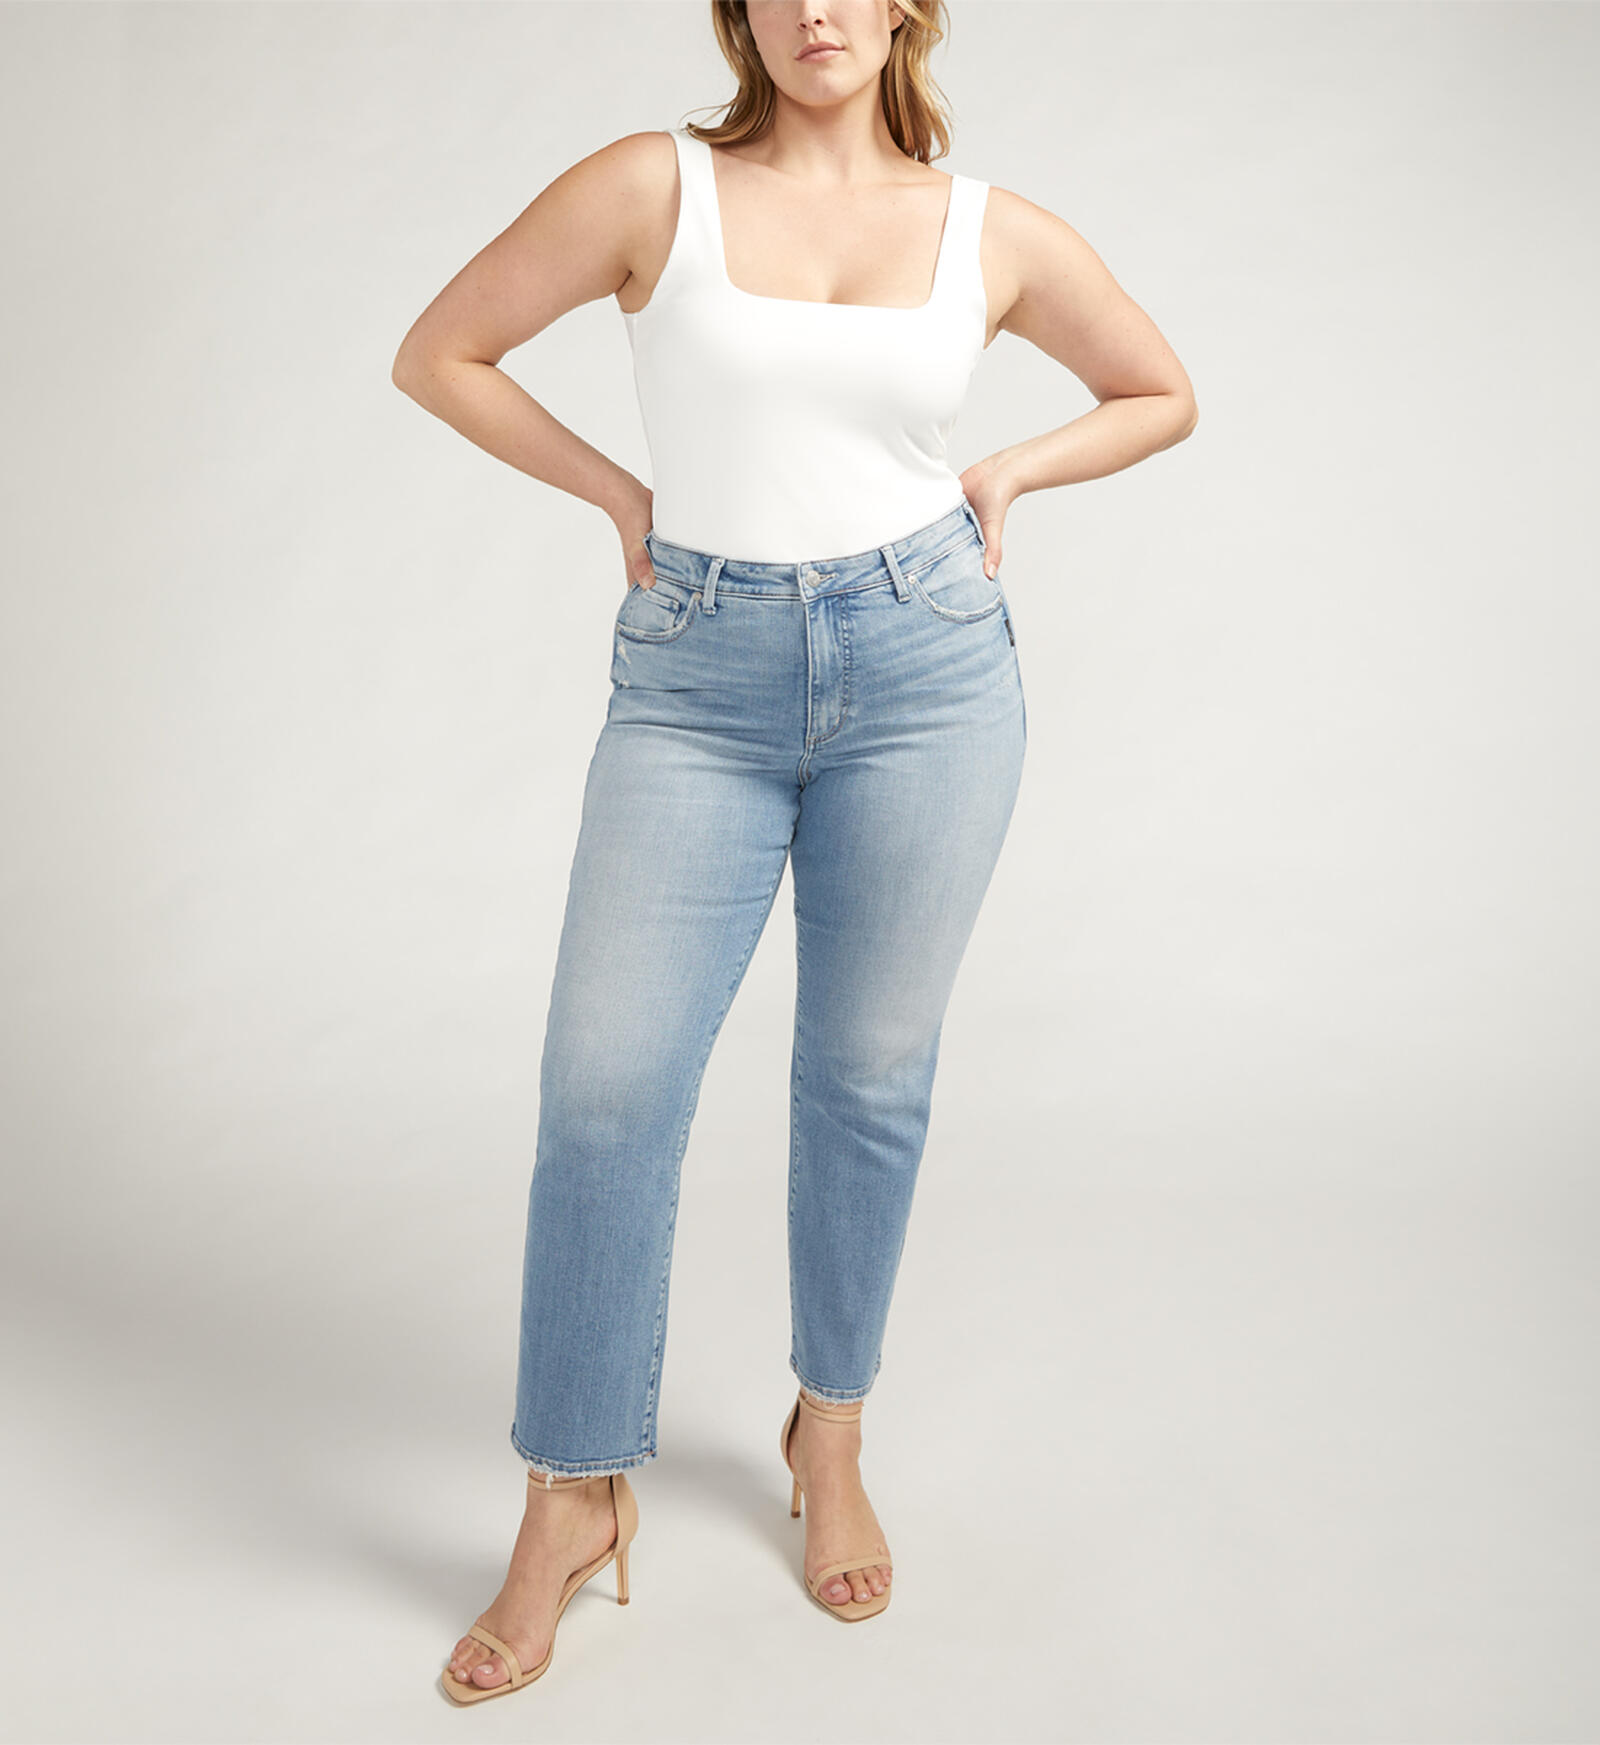 Buy Isbister High Rise Straight Leg Jeans Plus Size for CAD 94.00